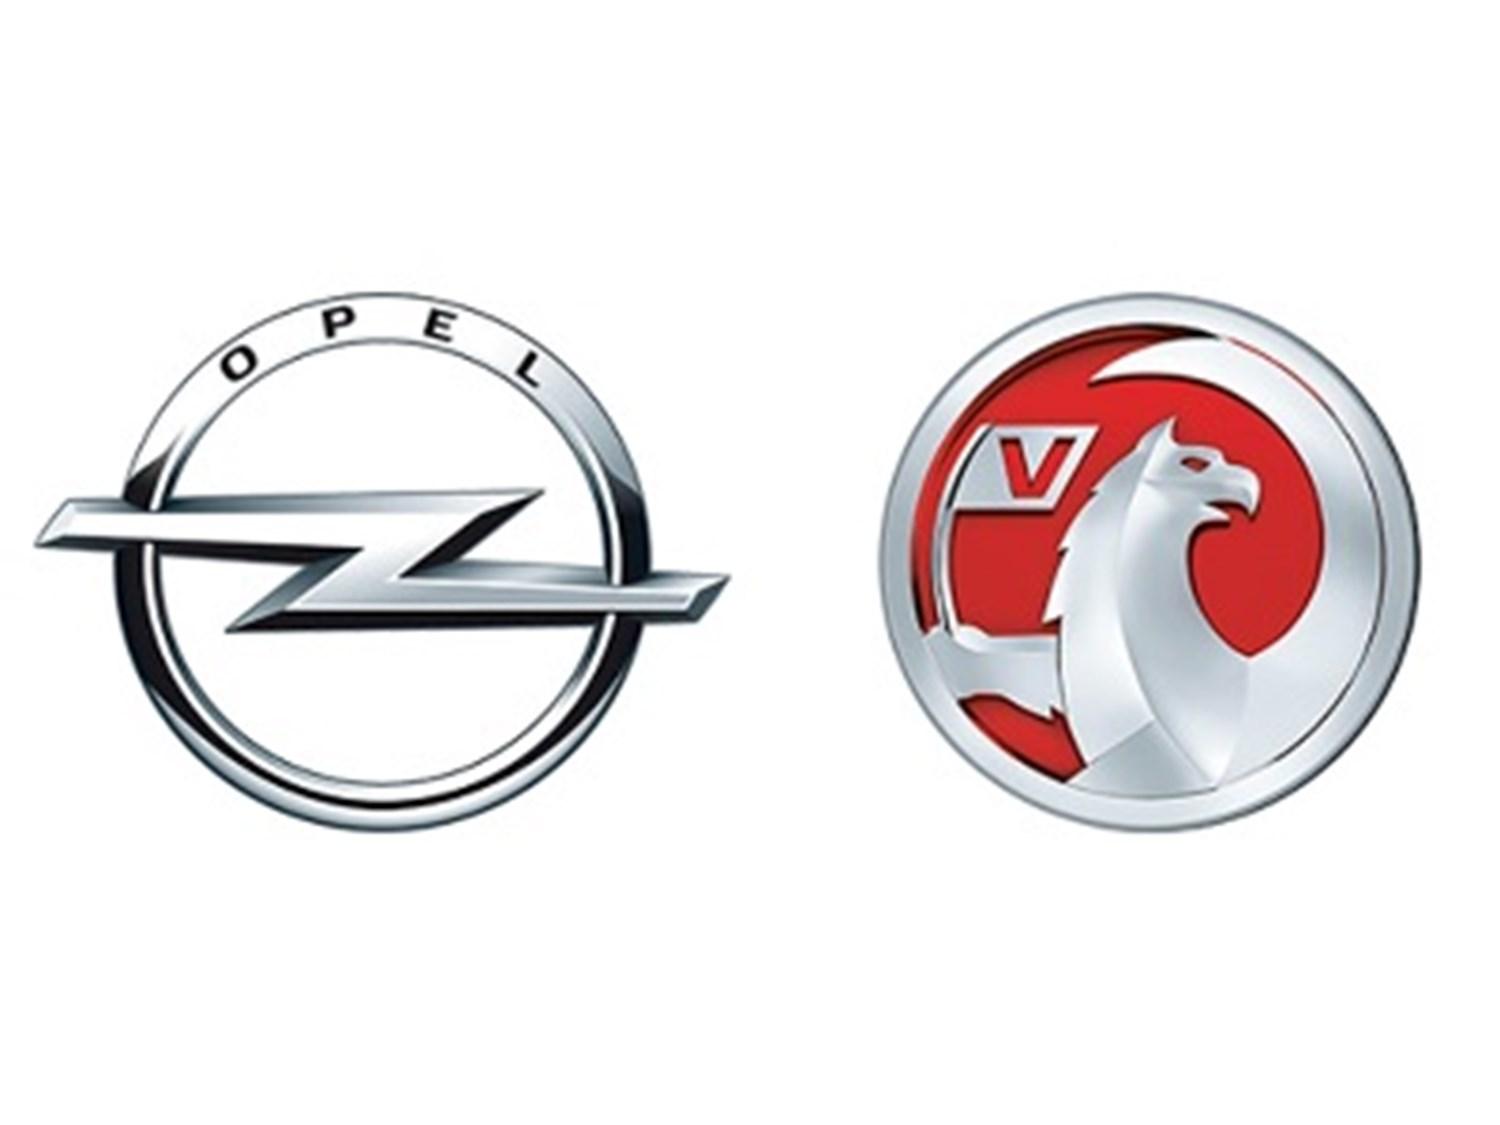 Why is Vauxhall called Opel?